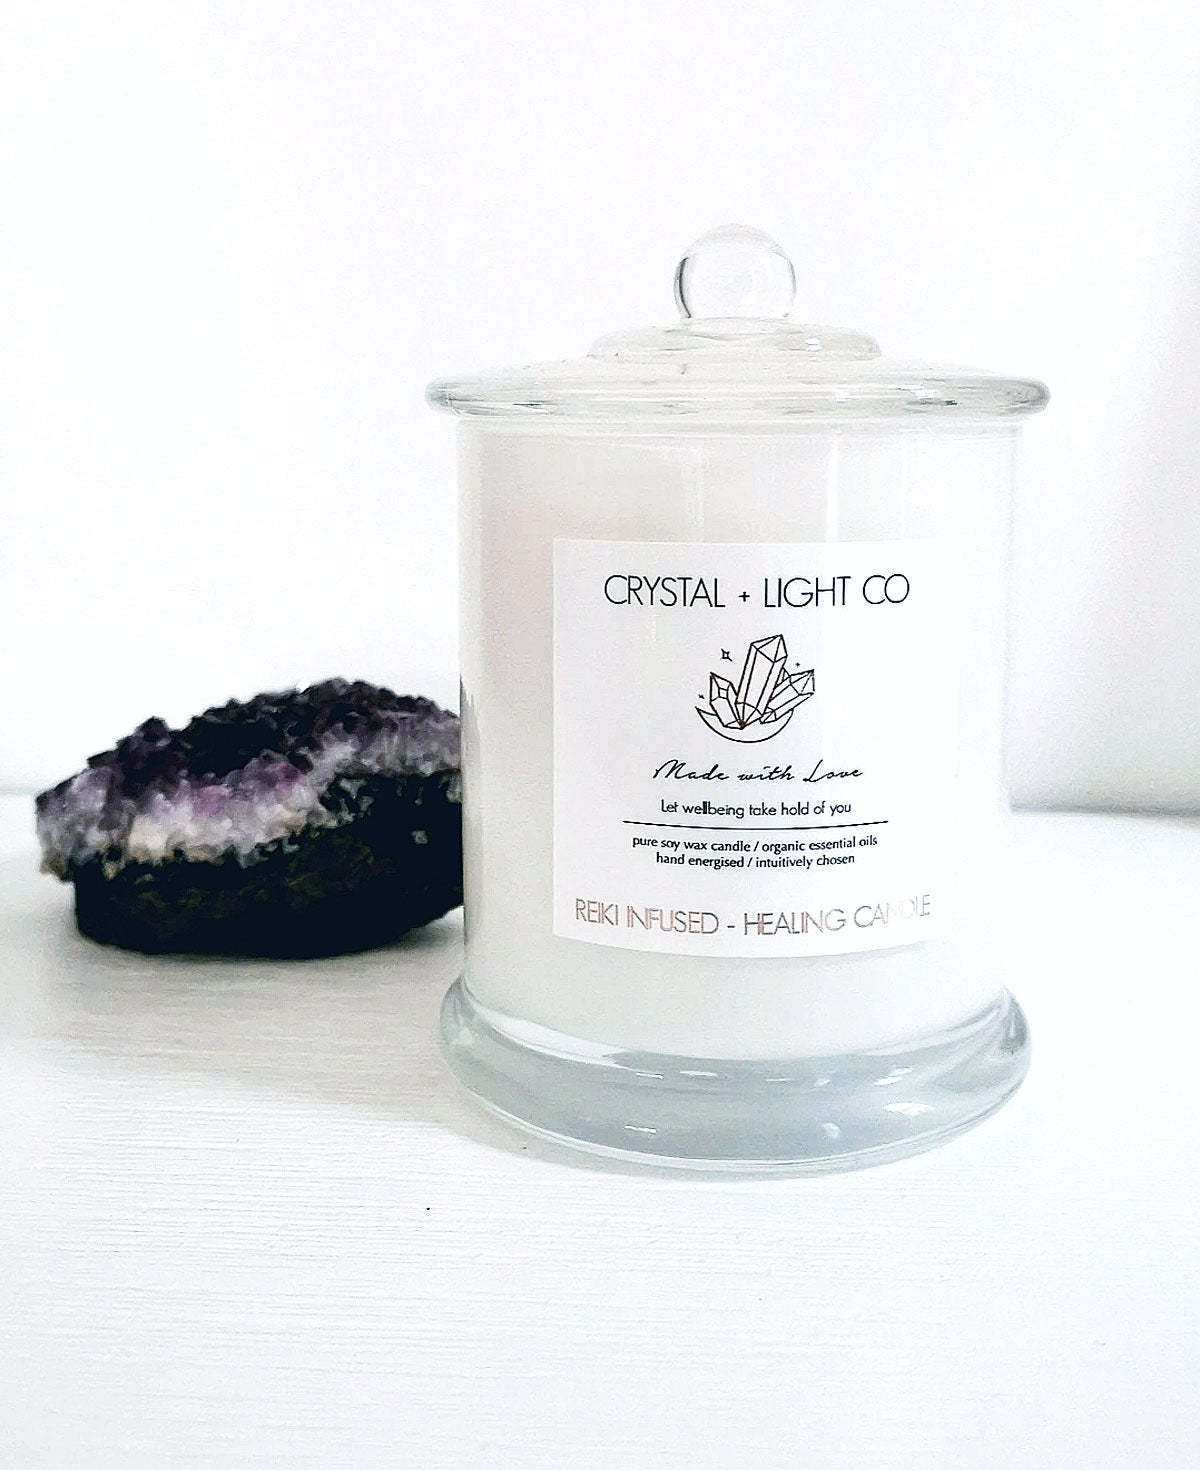 Christmas Spice - Lrg Healing candle